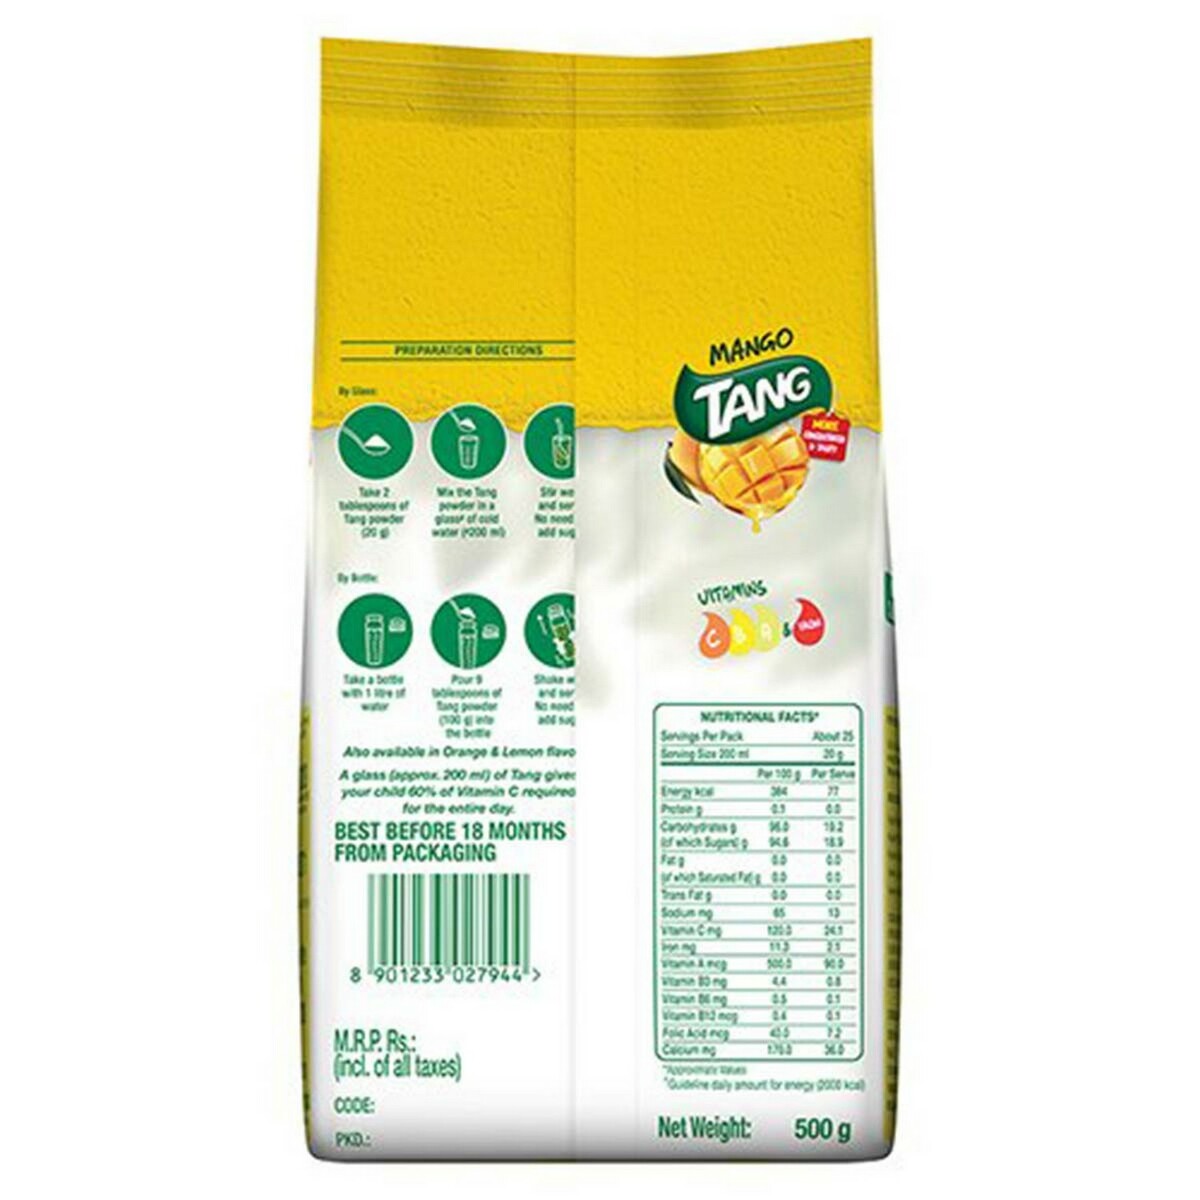 Tang Drink Mango Pouch 500g